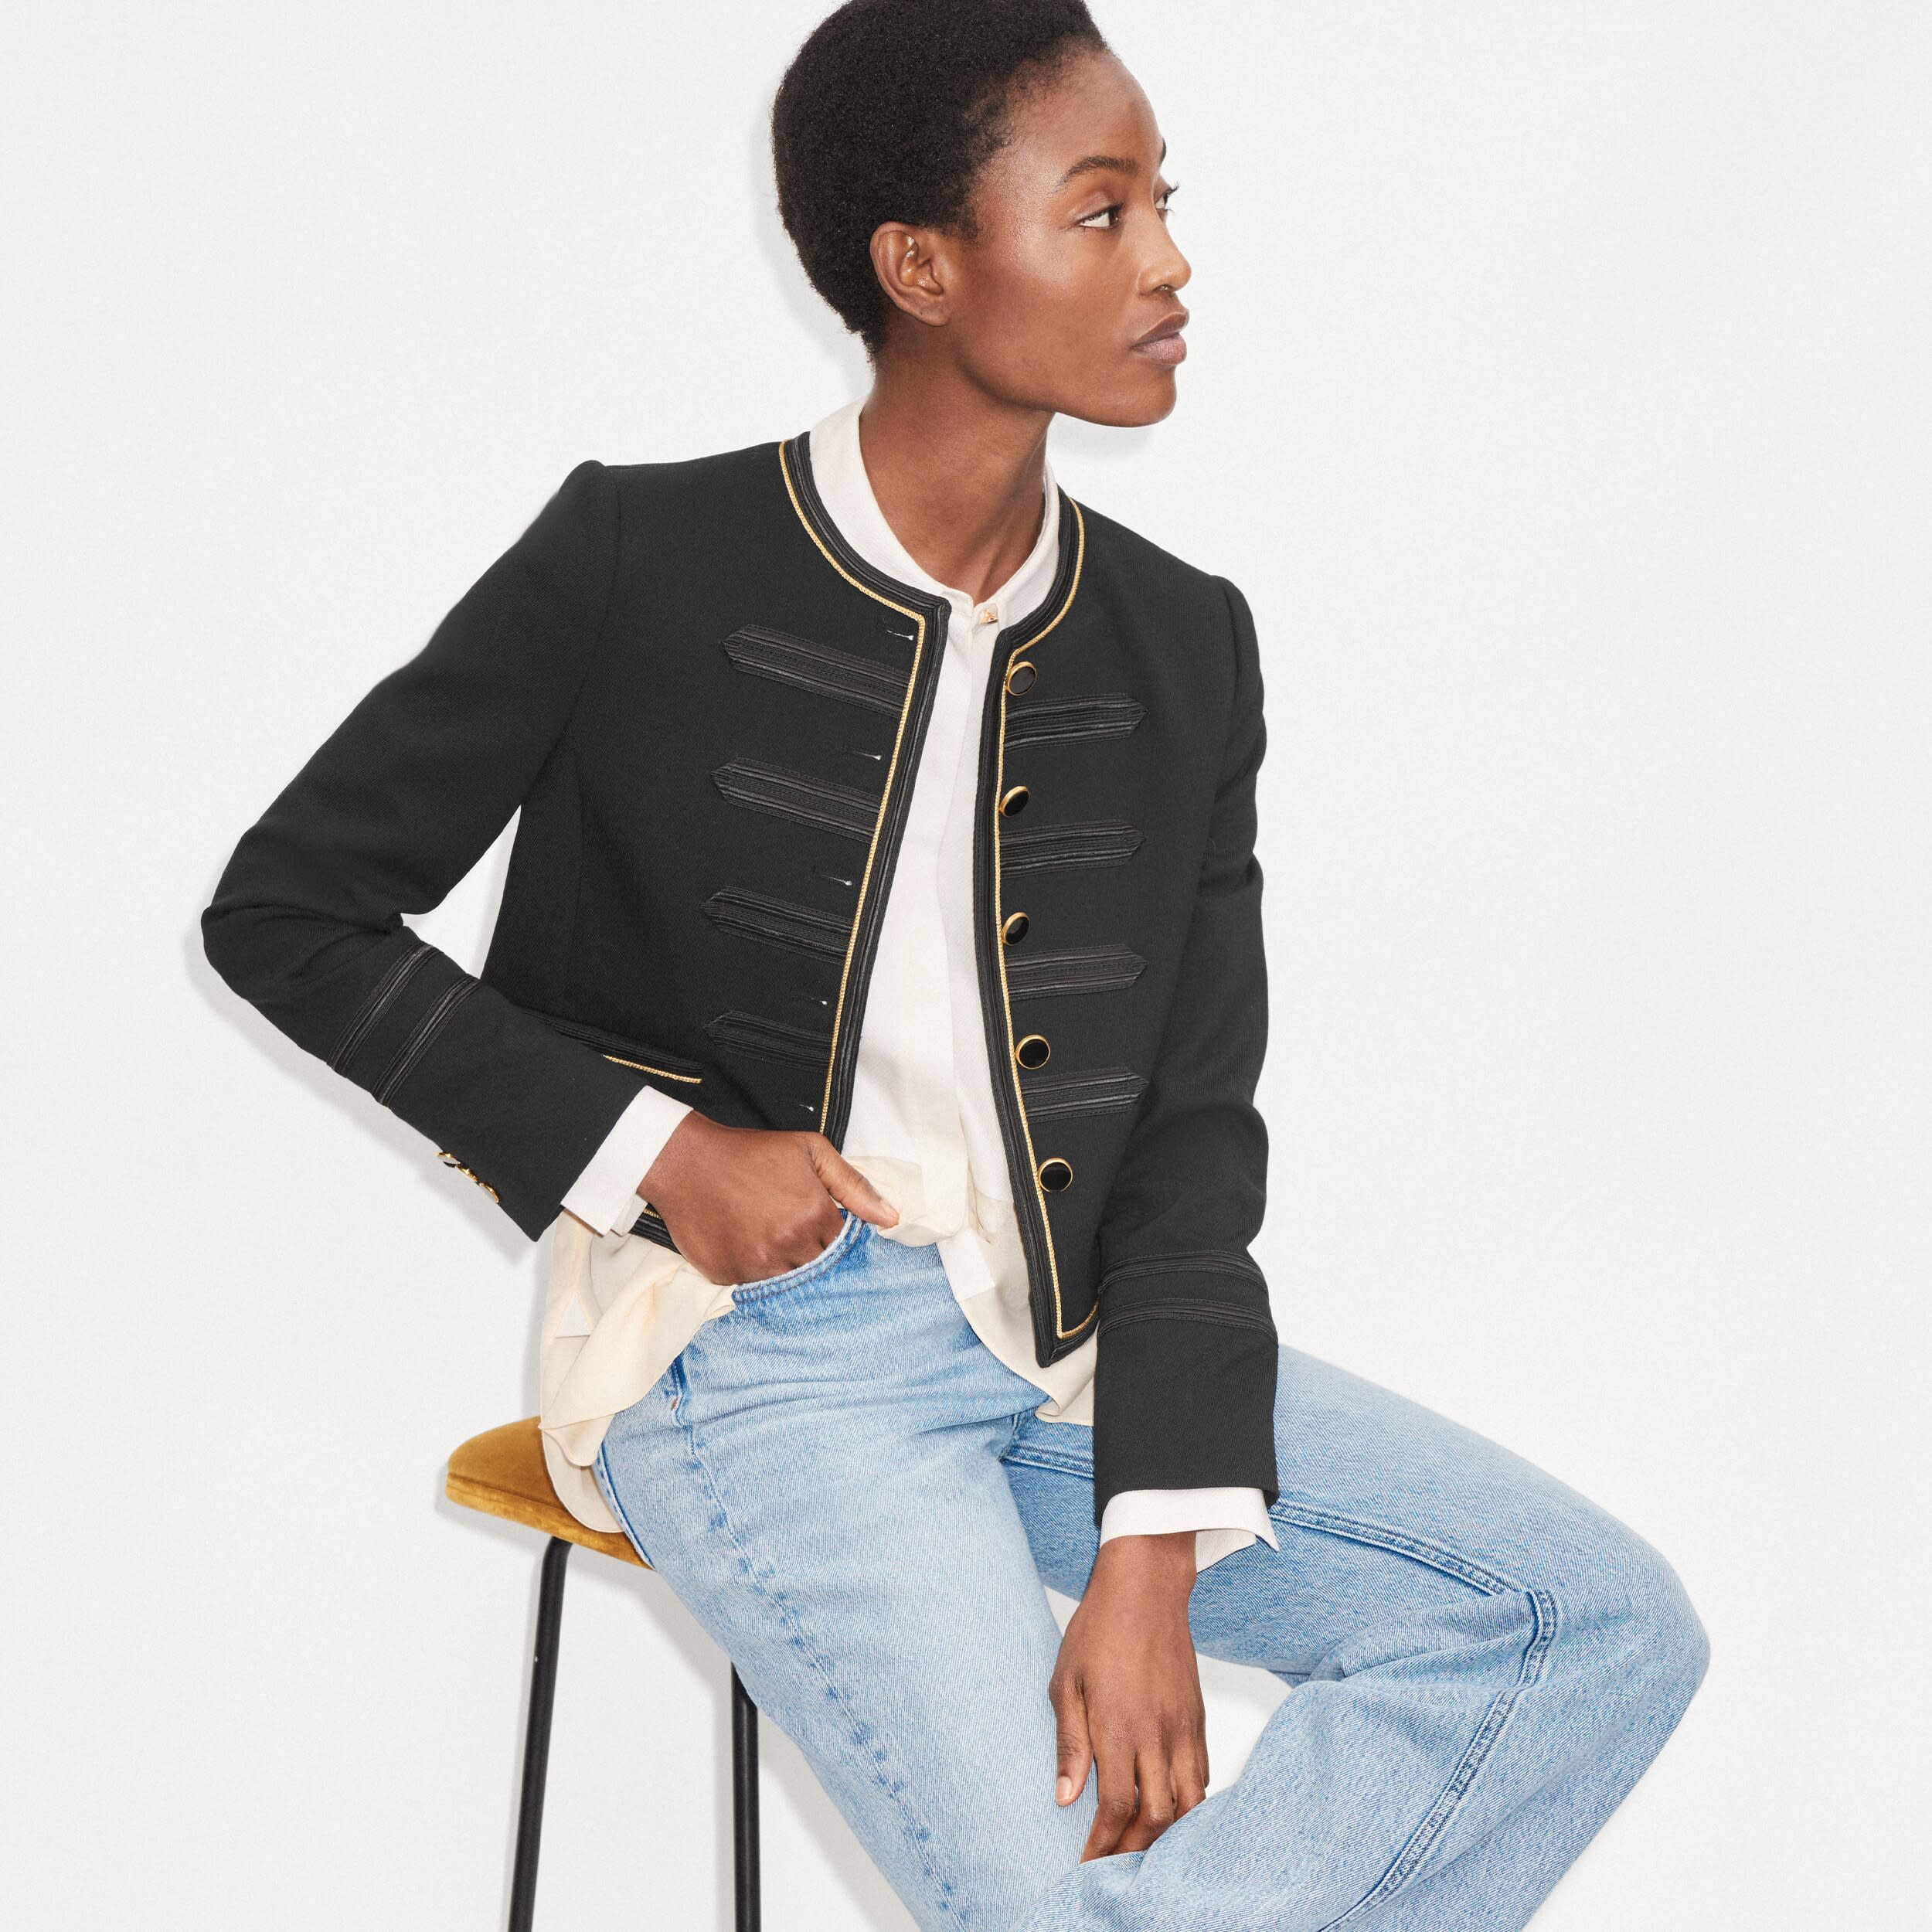 Turn Up Your Winter Outfit Game With a Go-Everywhere Blazer